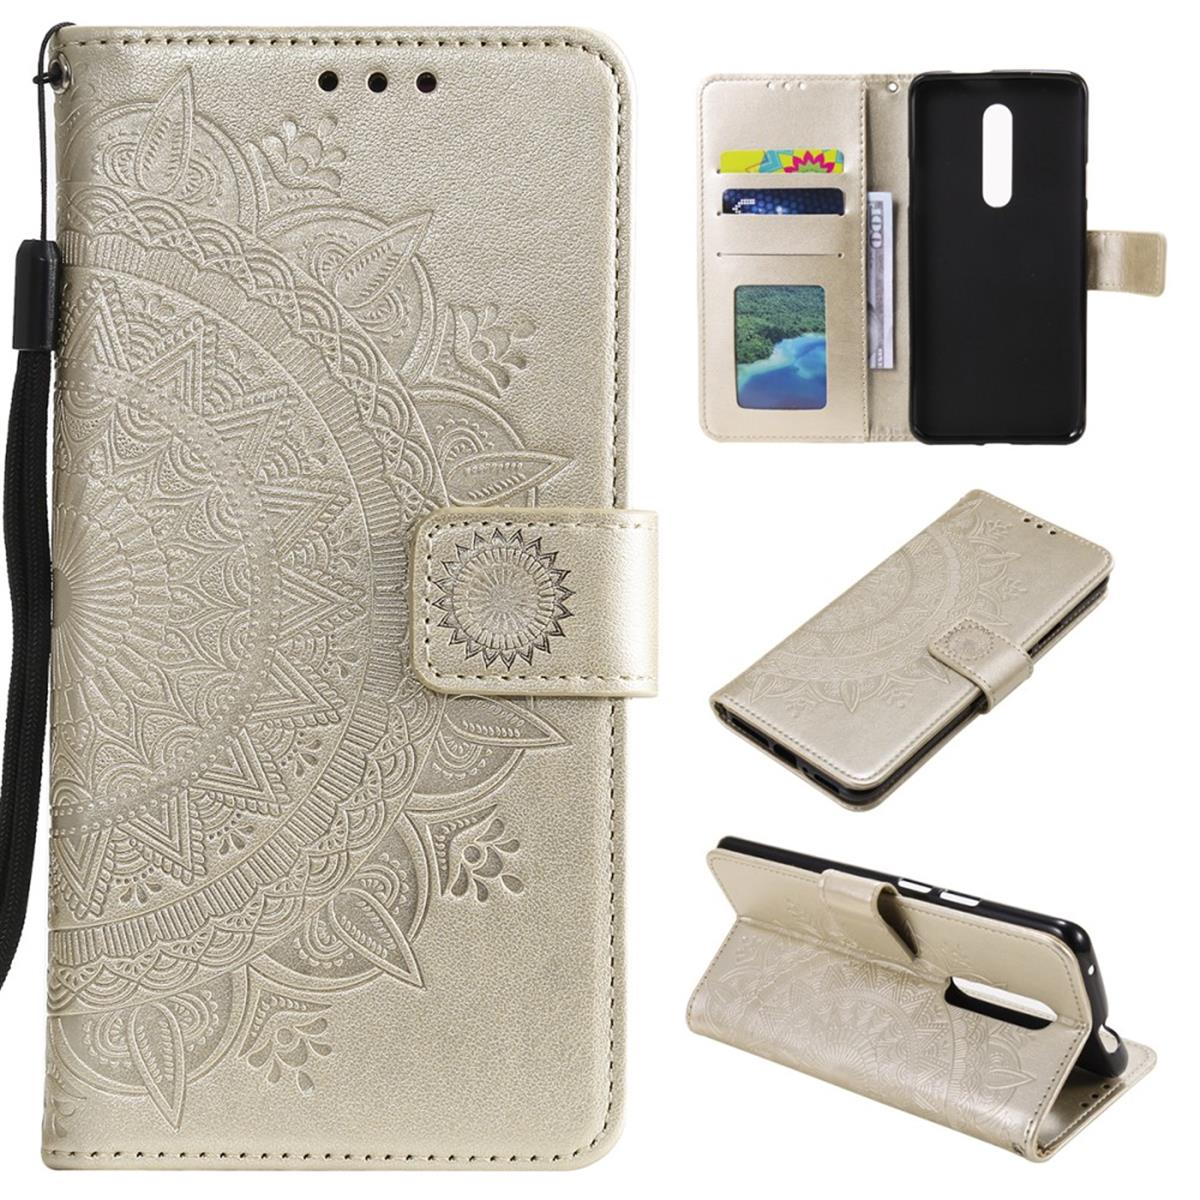 COVERKINGZ Klapphülle mit Muster, Nokia, Bookcover, Mandala Gold 2.4